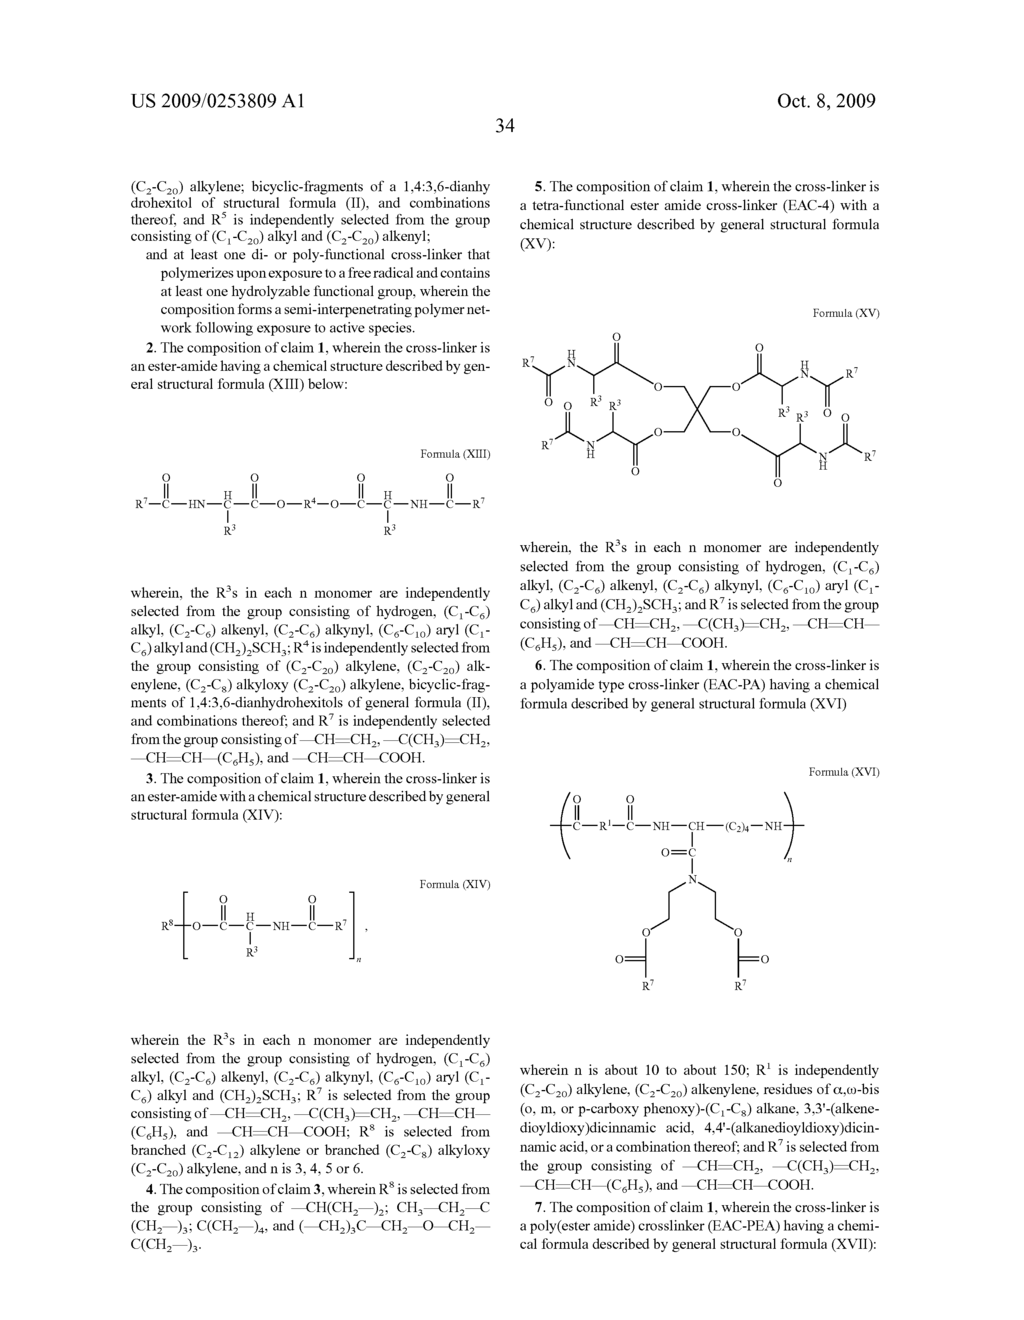 BIOABSORBABLE ELASTOMERIC POLYMER NETWORKS, CROSS-LINKERS AND METHODS OF USE - diagram, schematic, and image 43